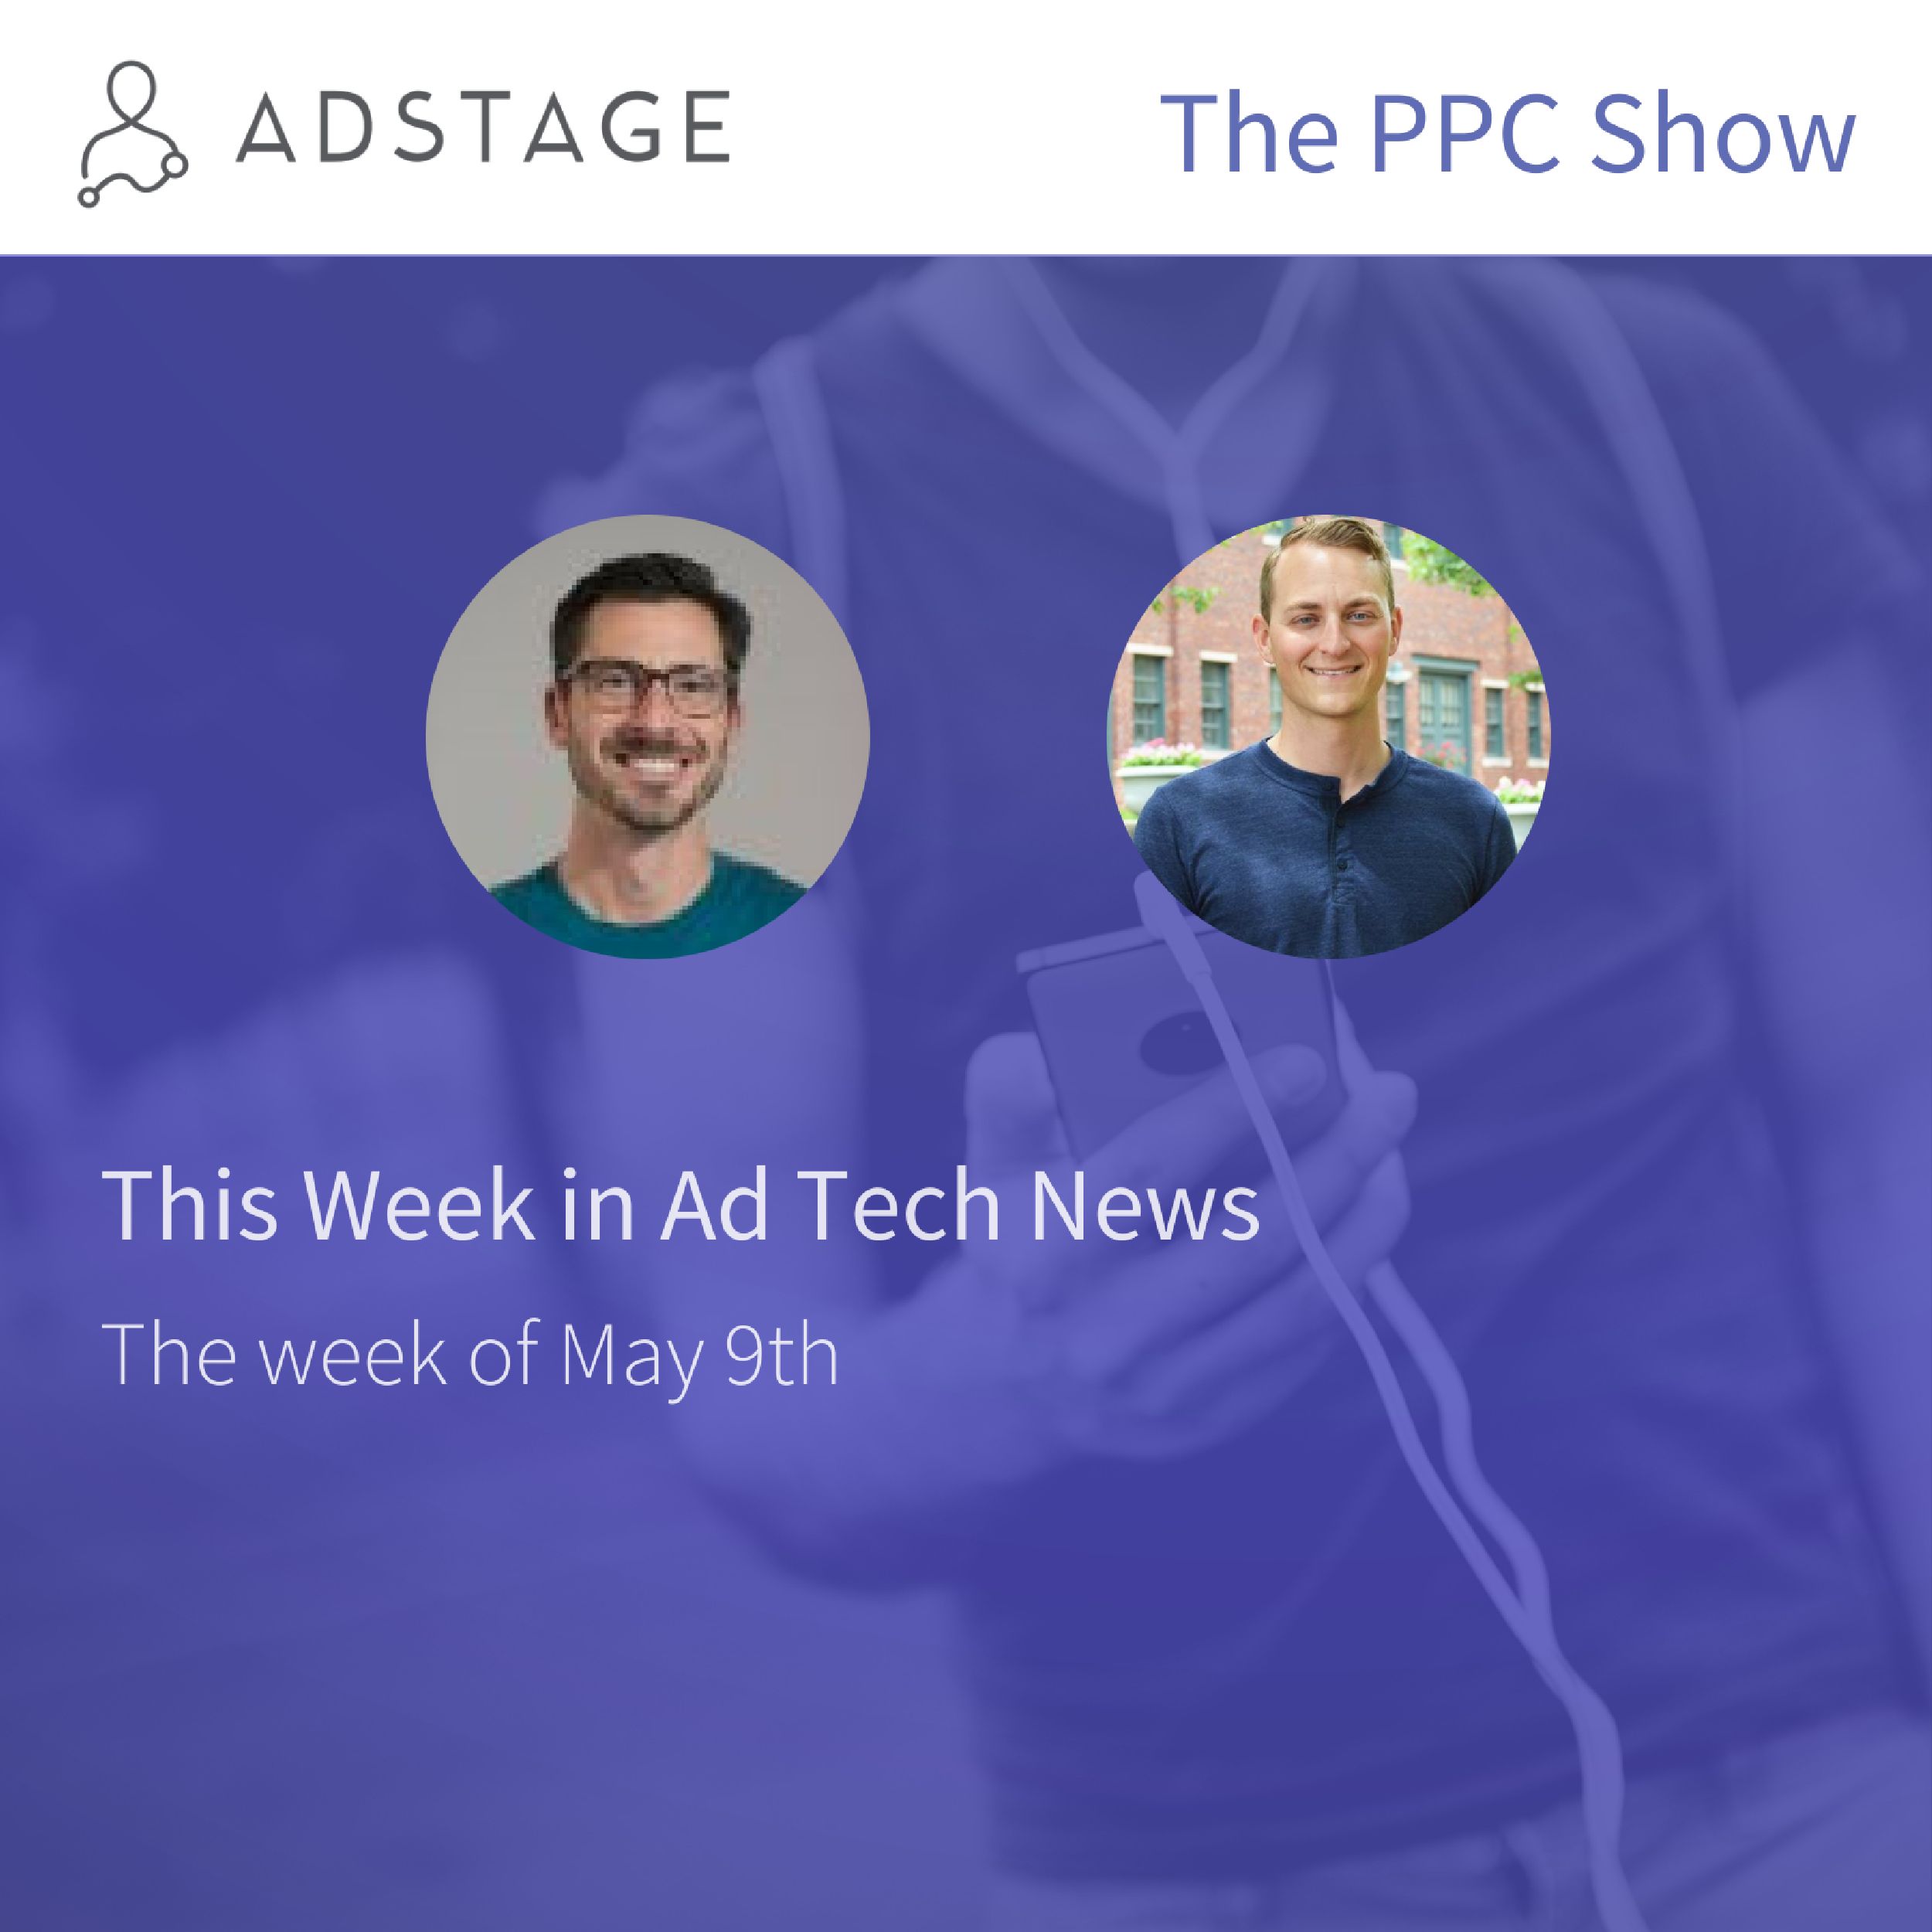 Special Edition - This Week in Ad Tech Headlines for May 9th